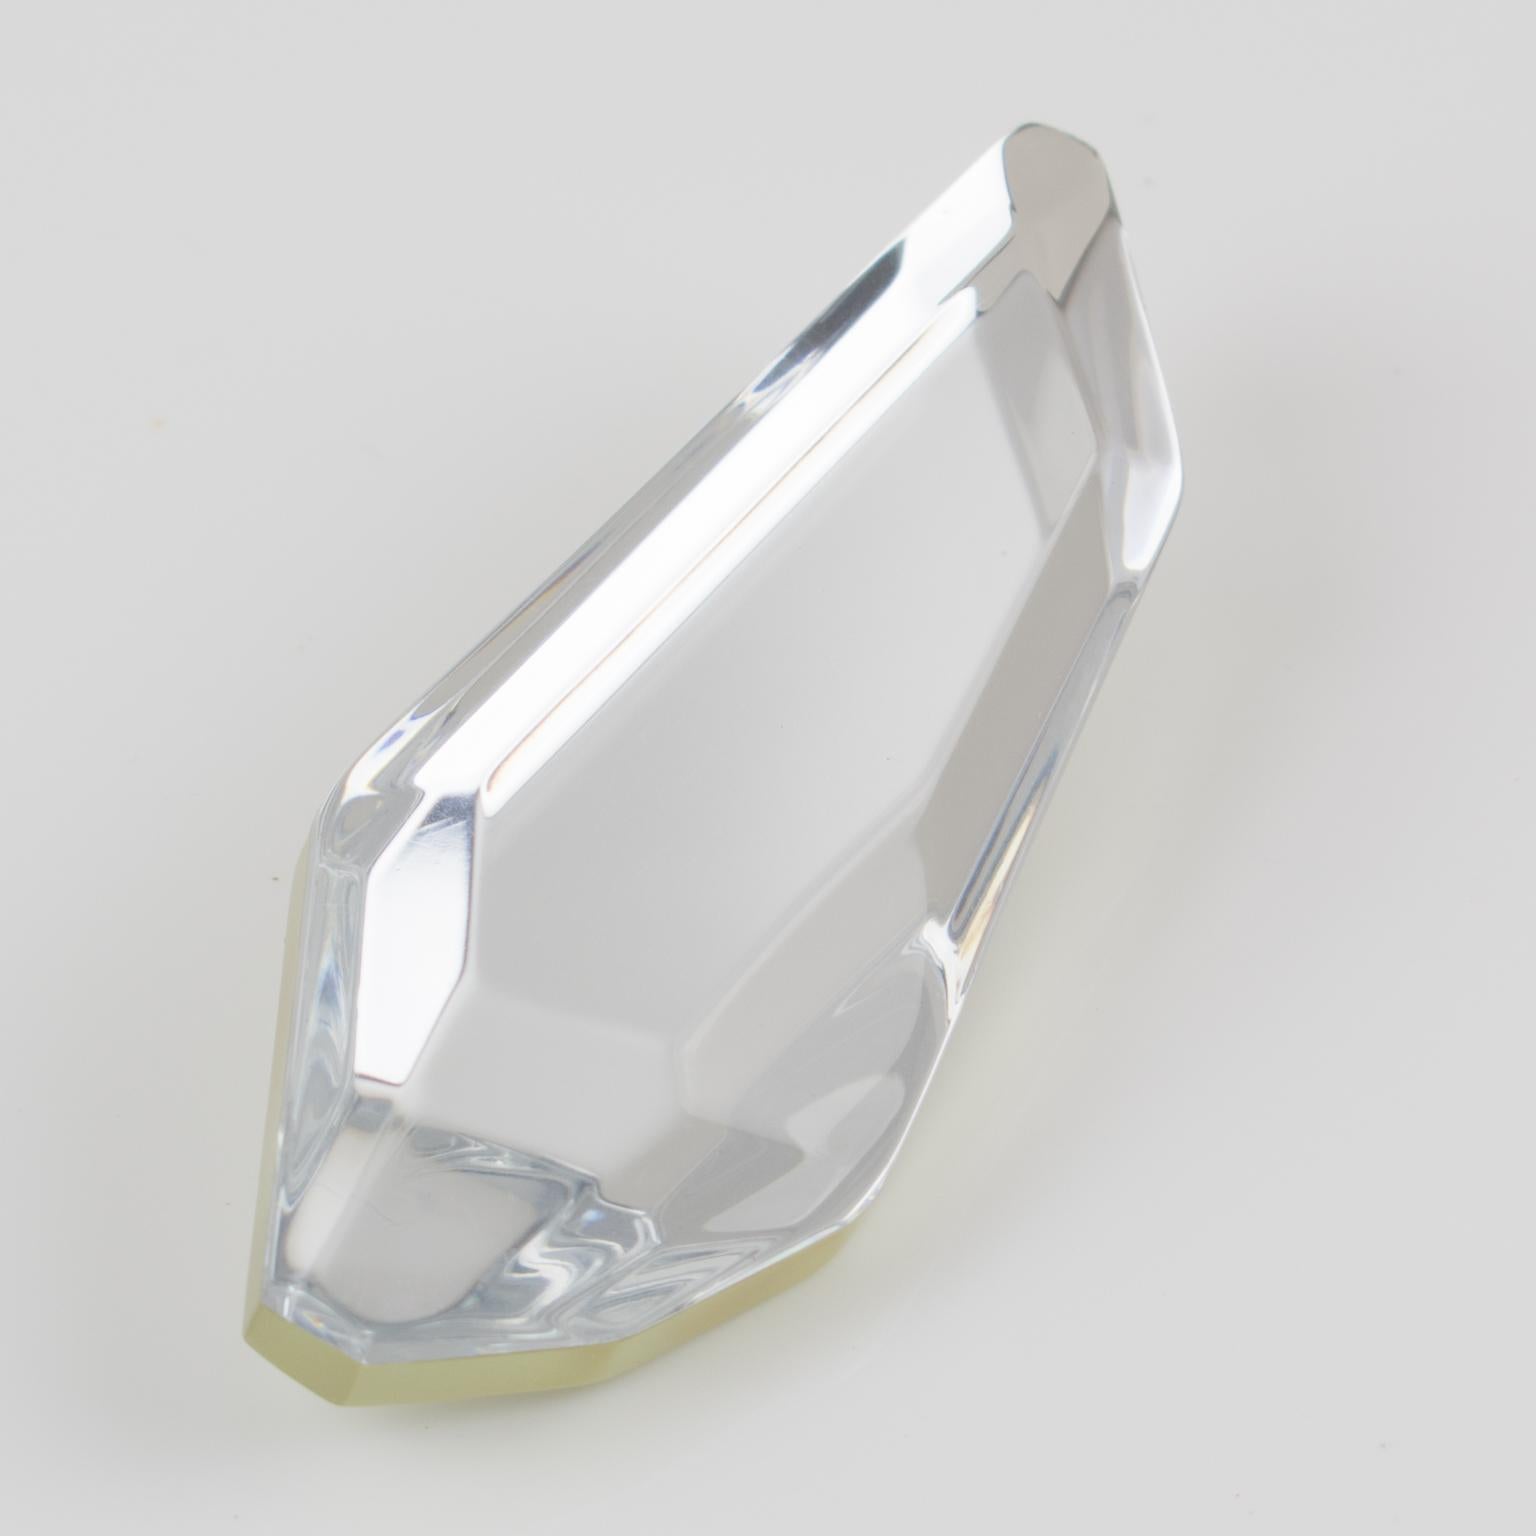 Harriet Bauknight for Kaso designed this stunning oversized Lucite pin brooch. The piece features a dimensional faceted ice cube with a crystal clear mirror texture pattern and beveling edges. The Kaso brand paper sticker was removed. But the solid